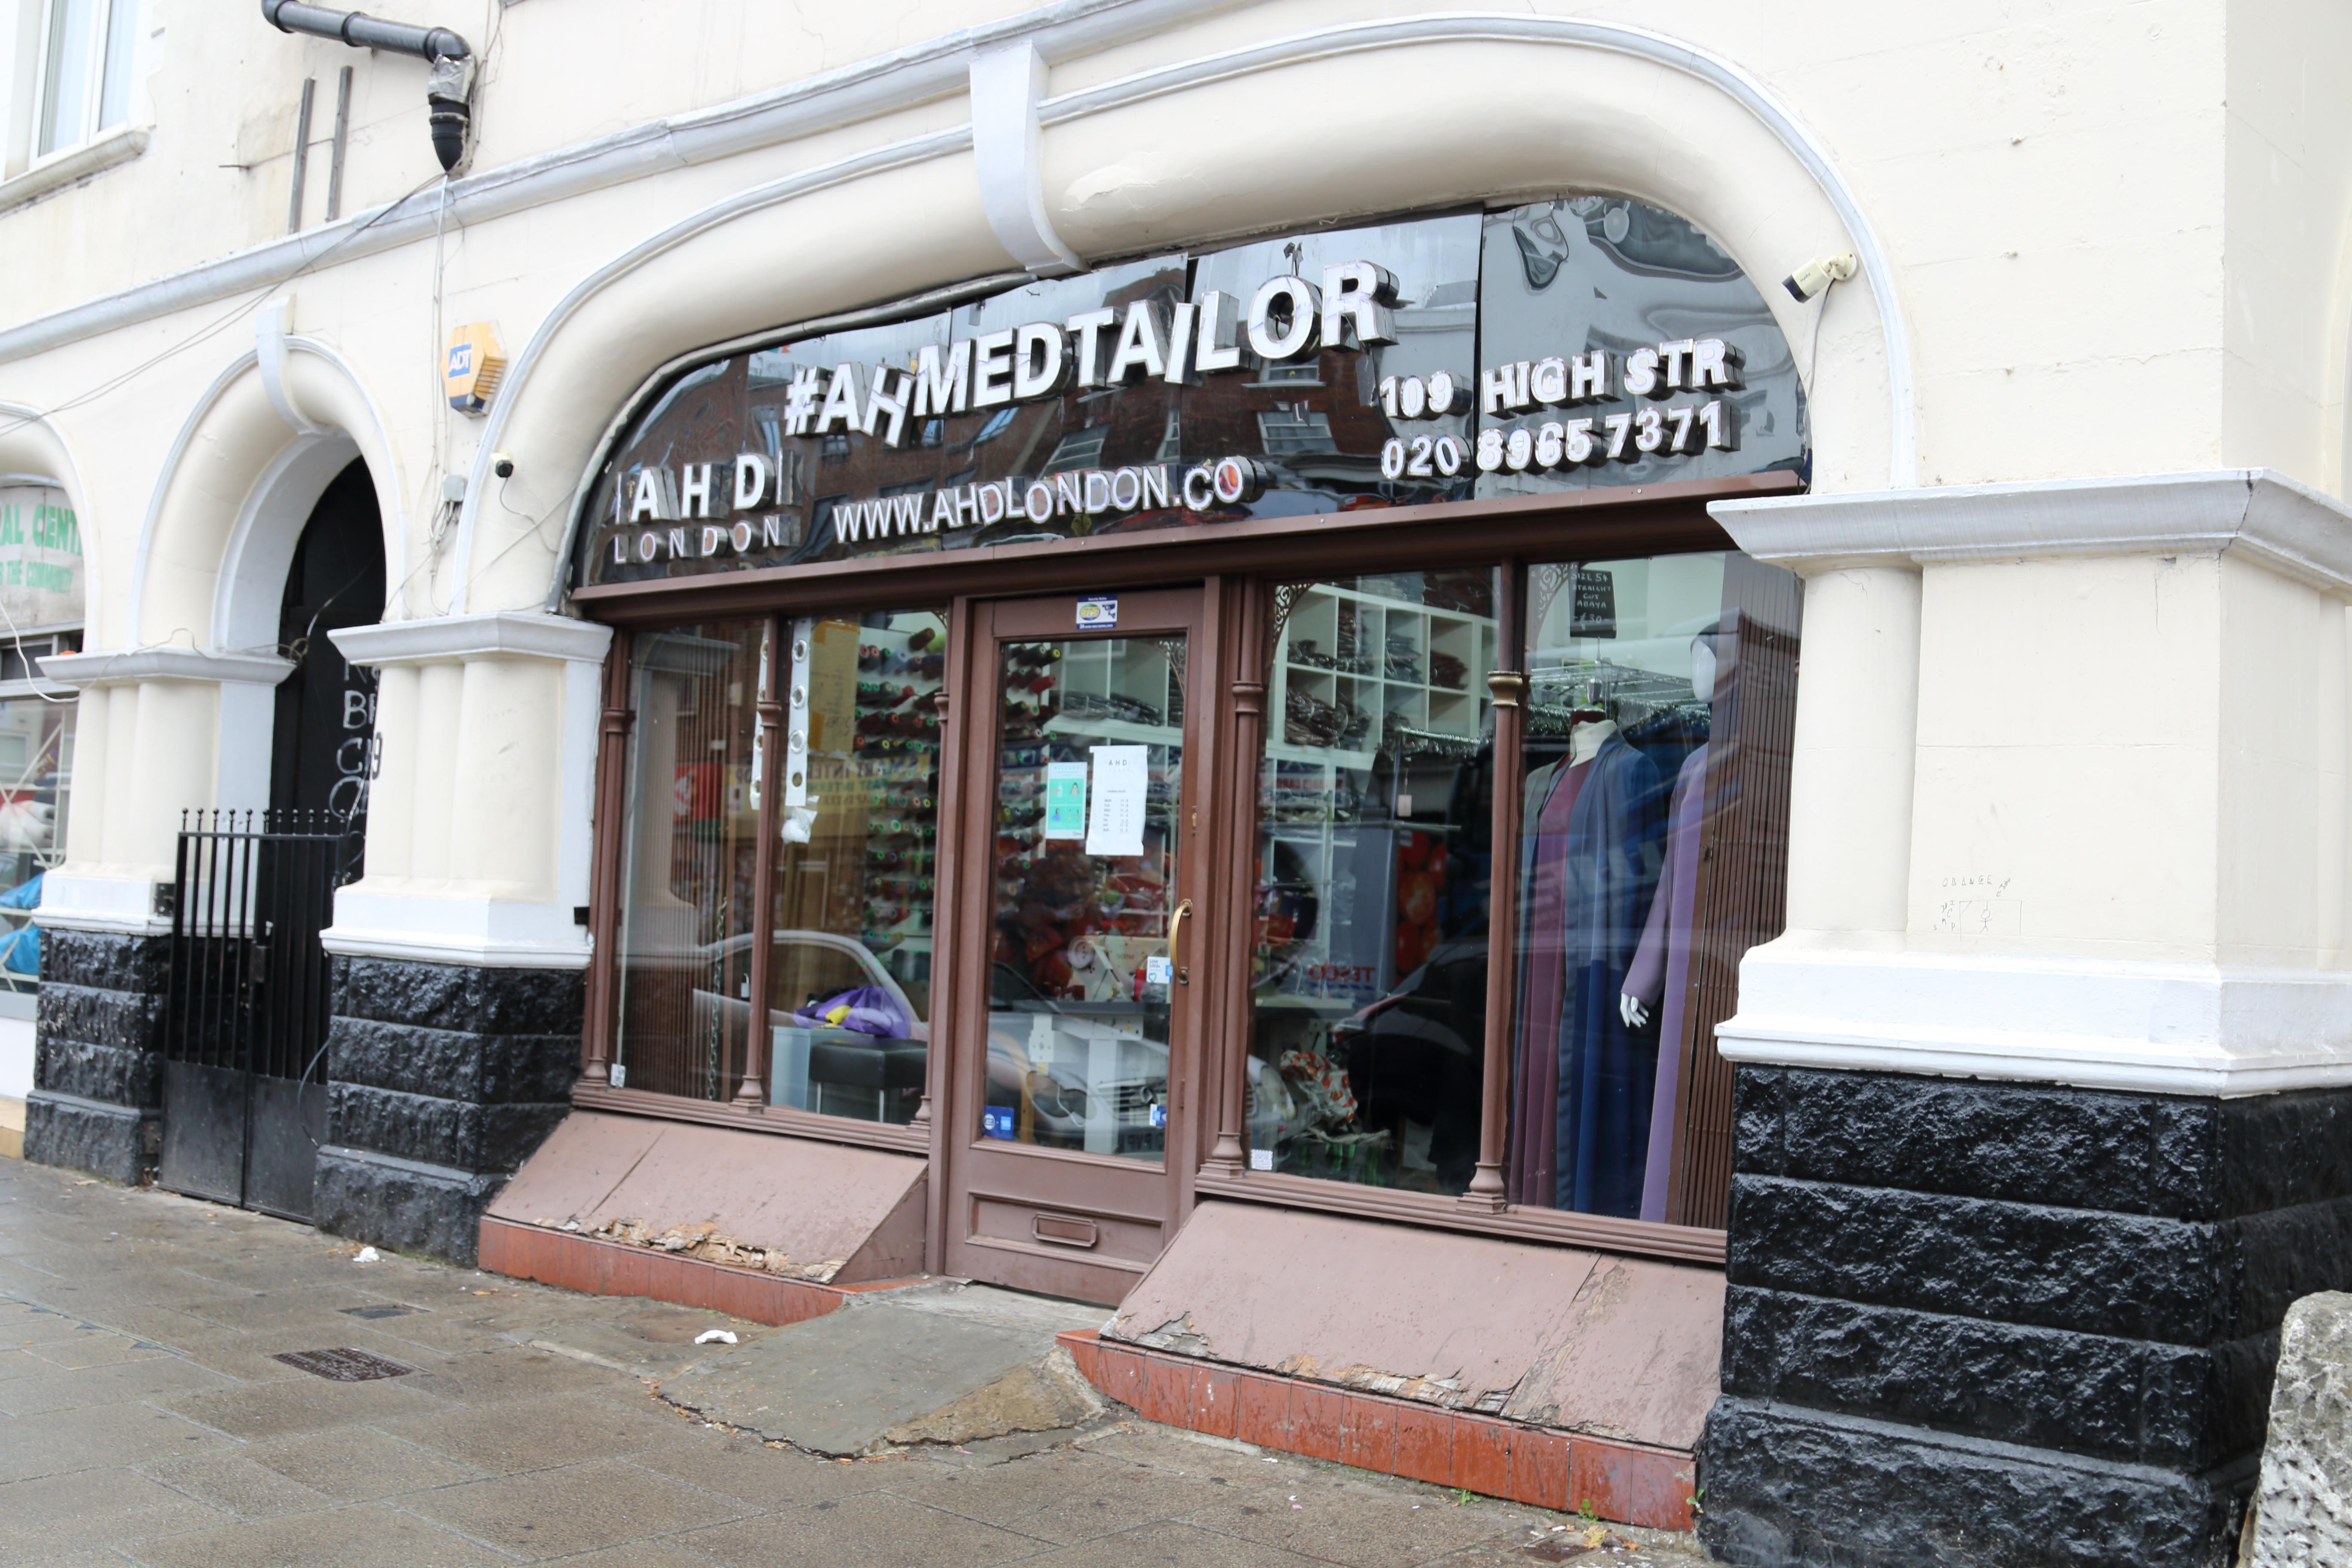 Colour image showing the shopfront of Ahmed Tailors in Harlesden.